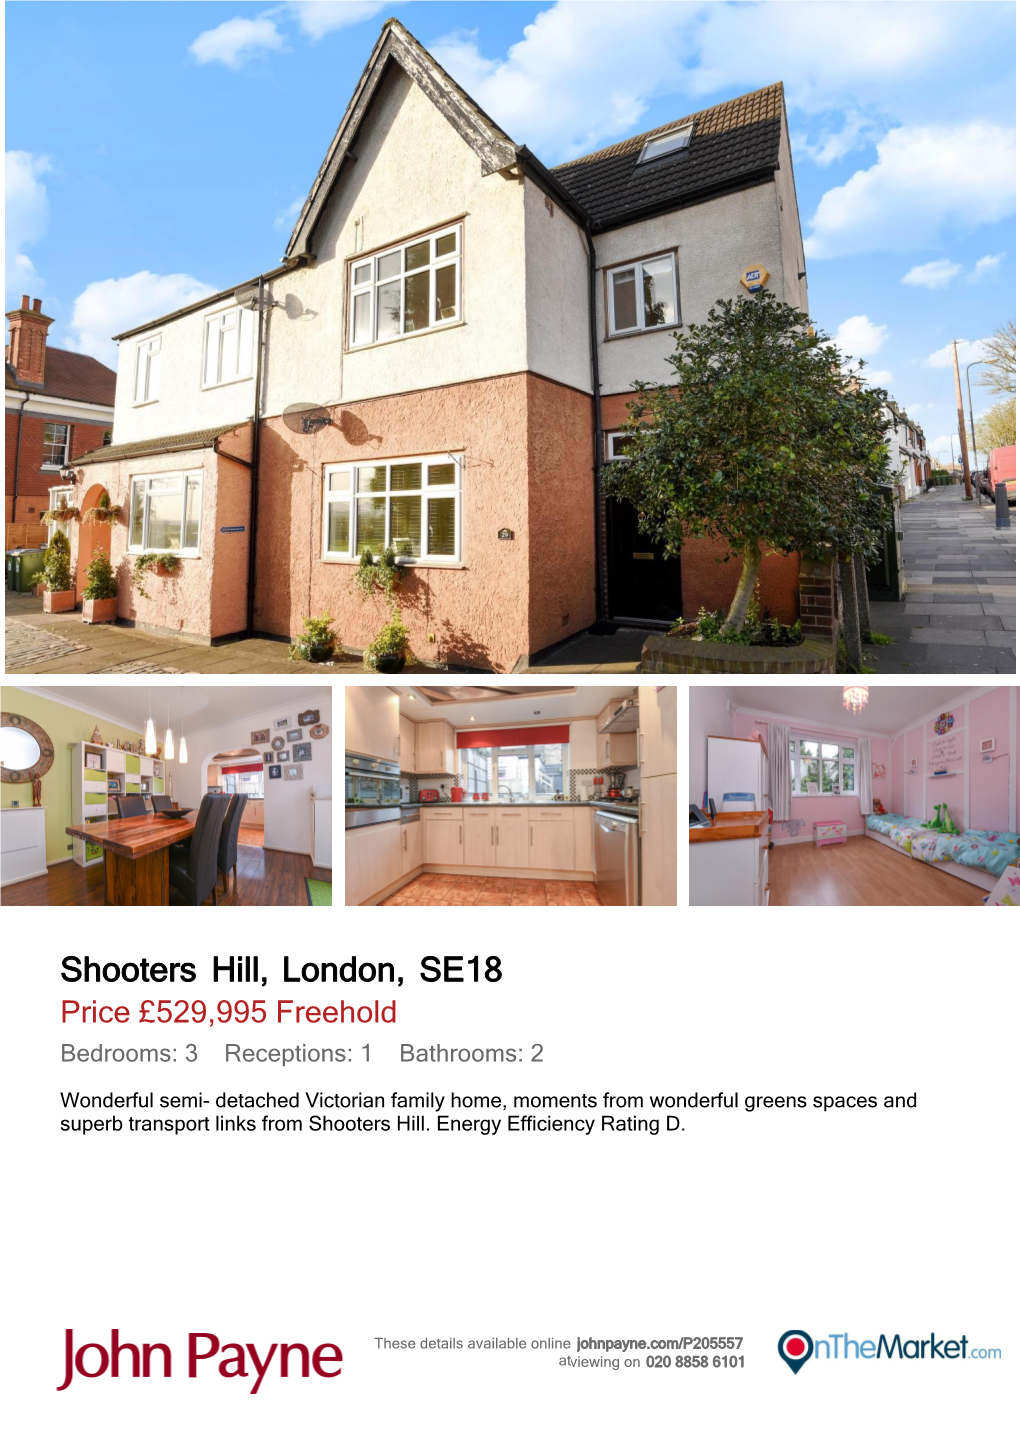 Shooters Hill, London, SE18 Price £529,995 Freehold Bedrooms: 3 Receptions: 1 Bathrooms: 2